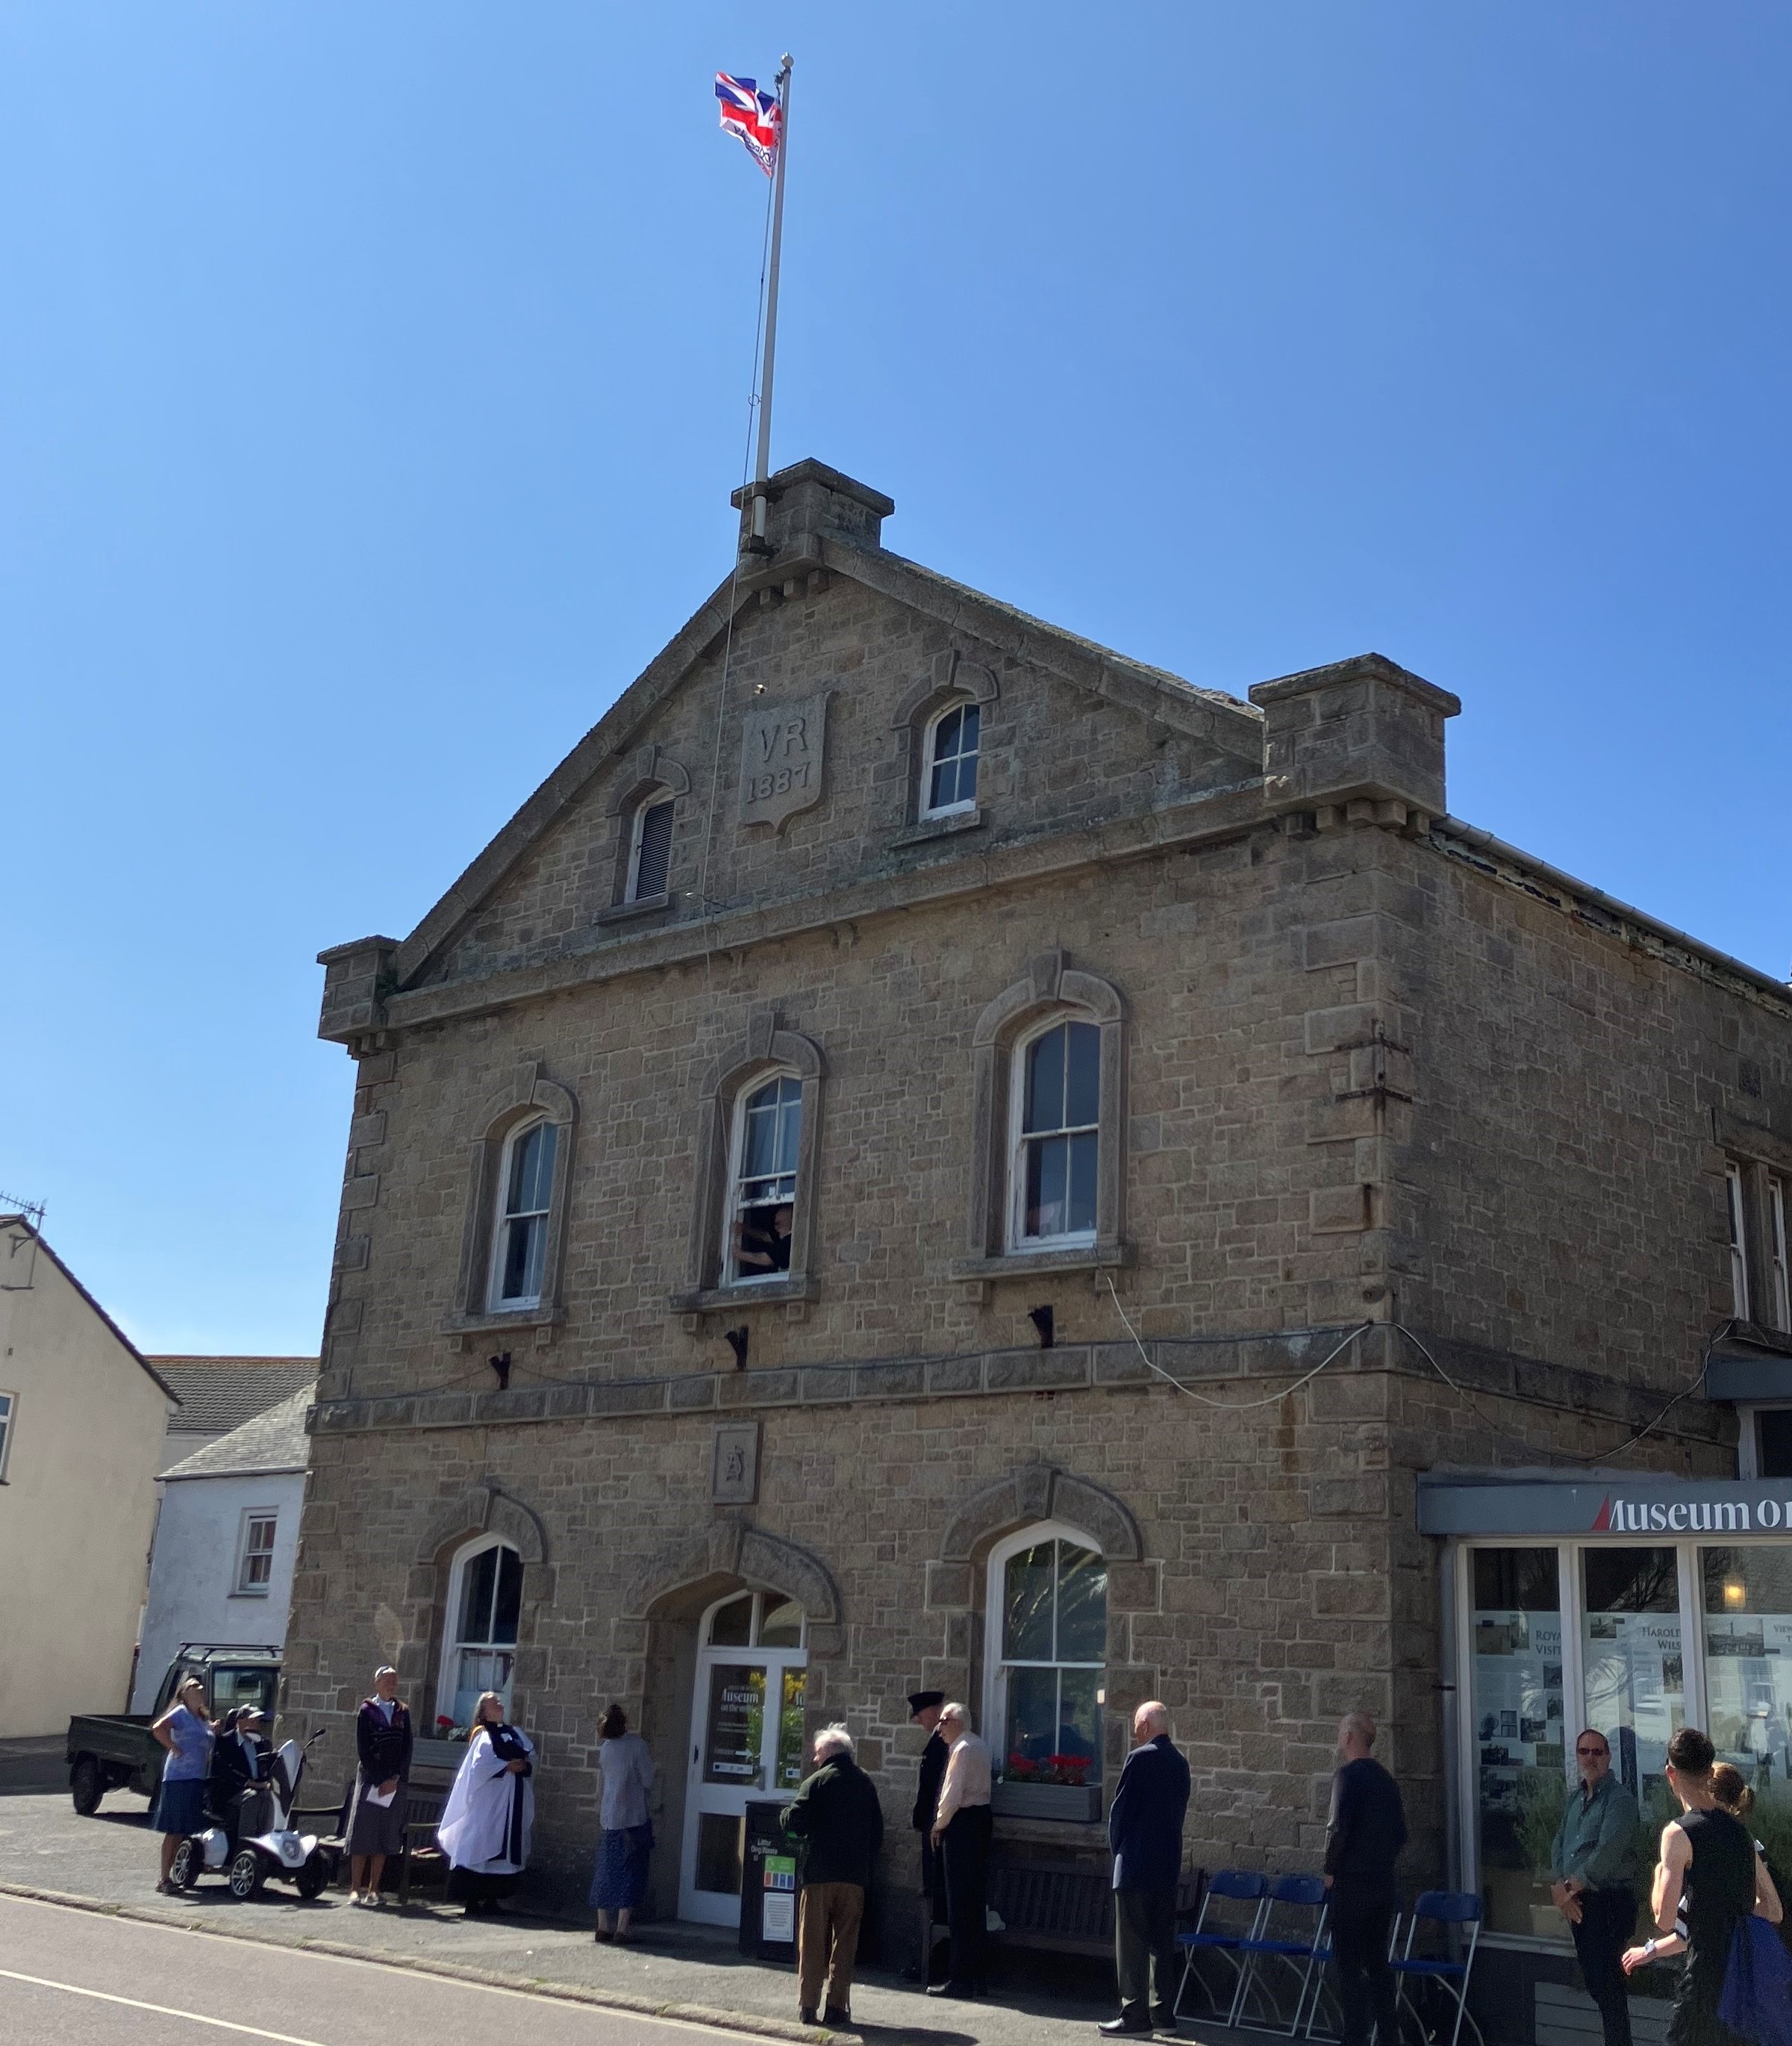 Image of the Armed Forces Day flag raised on the Town Hall with people gathered outside